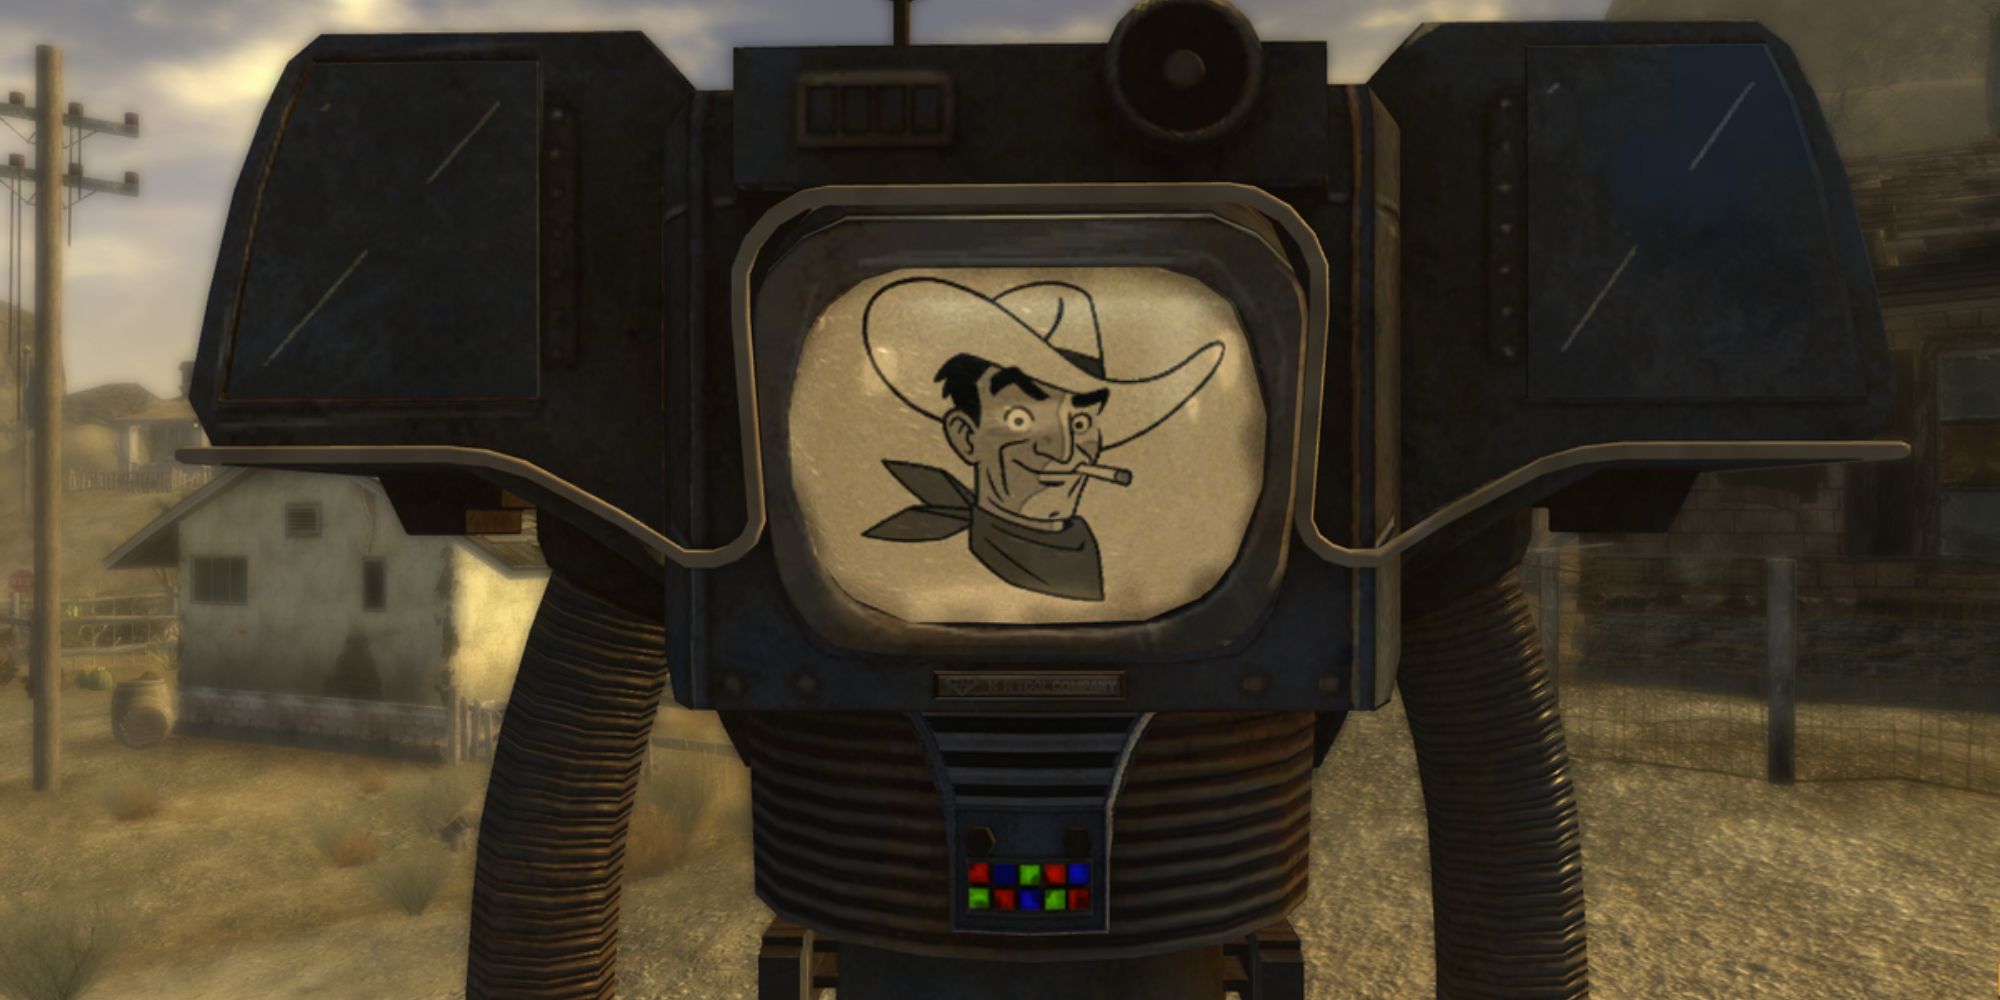 Robots In Video Games a close up of the securitron Victor from Fallout New Vegas standing on a sand-covered road with a picture of a cowboy on the large screen at the top of its body